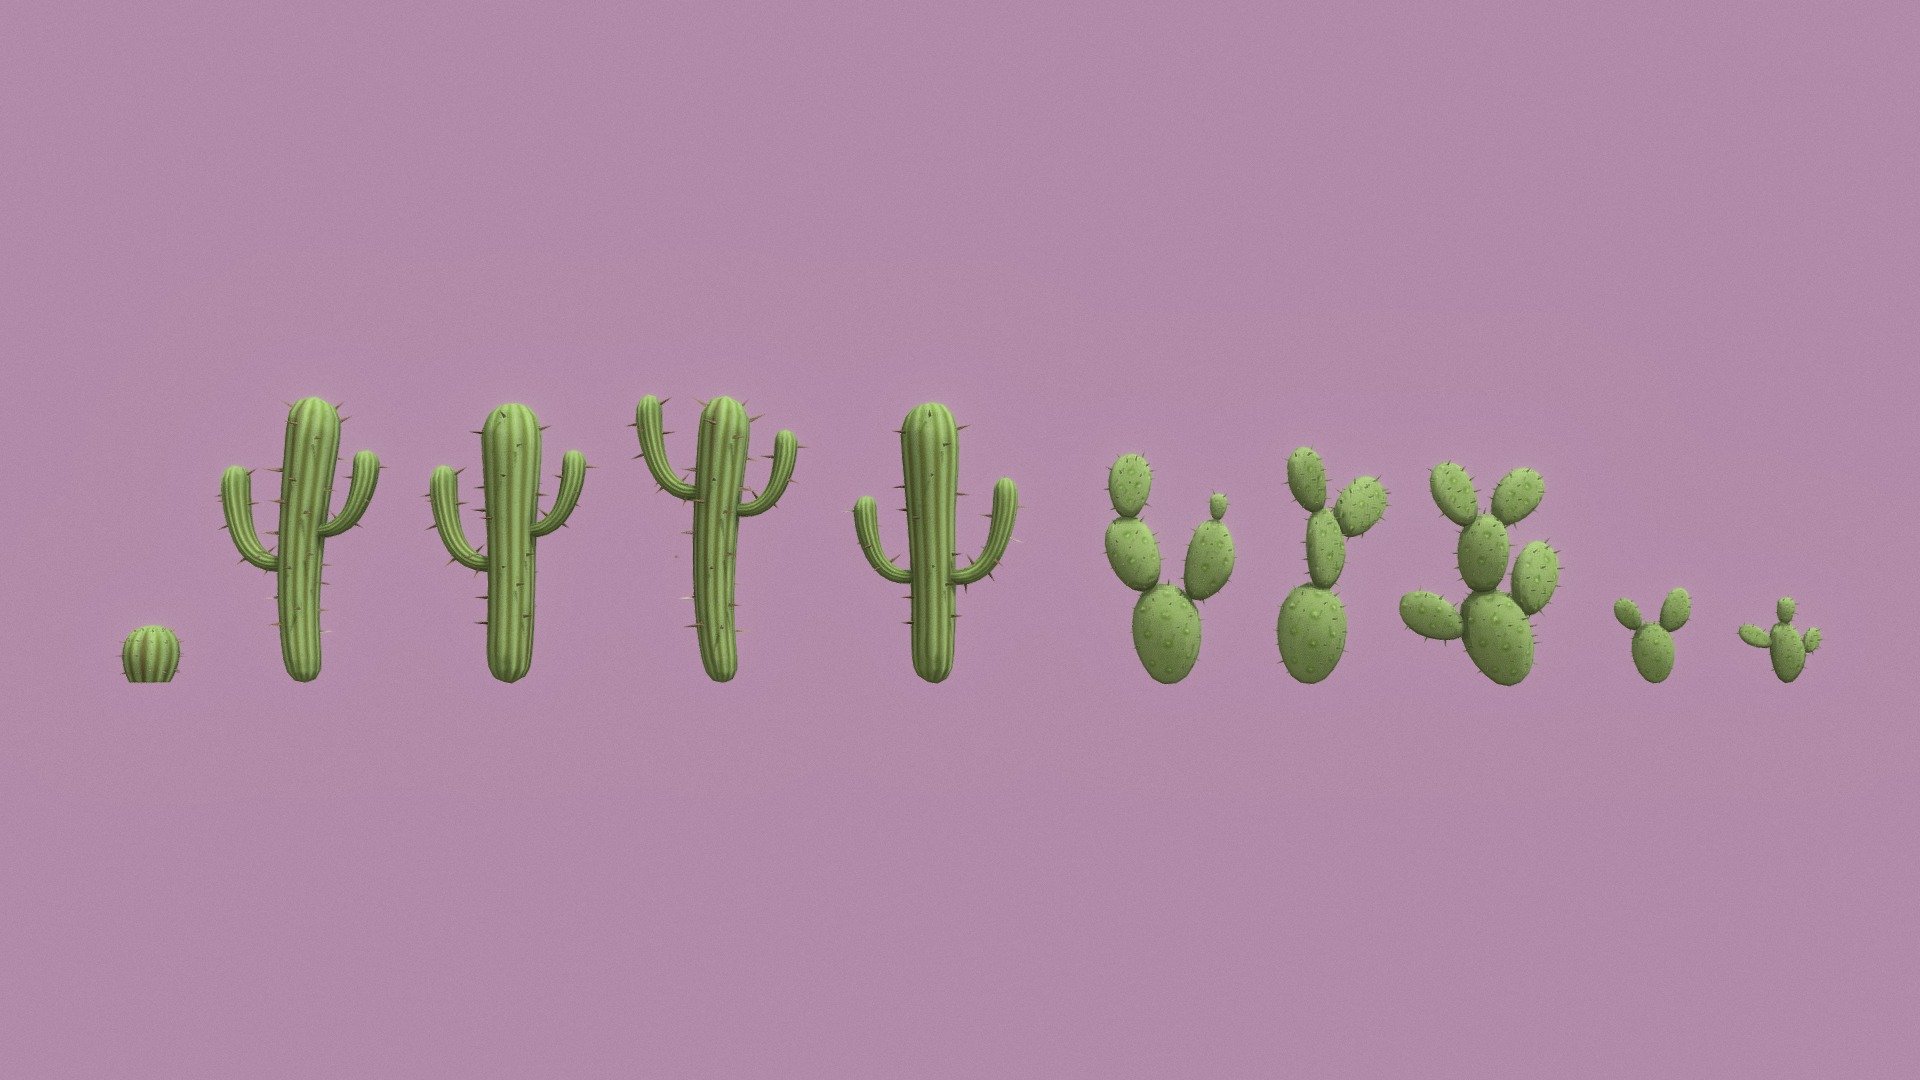 Stylized cactus made with Blender and Substance Painter. 
2048 X 2048 Textures. I hope you like this Cactus Set 3d model